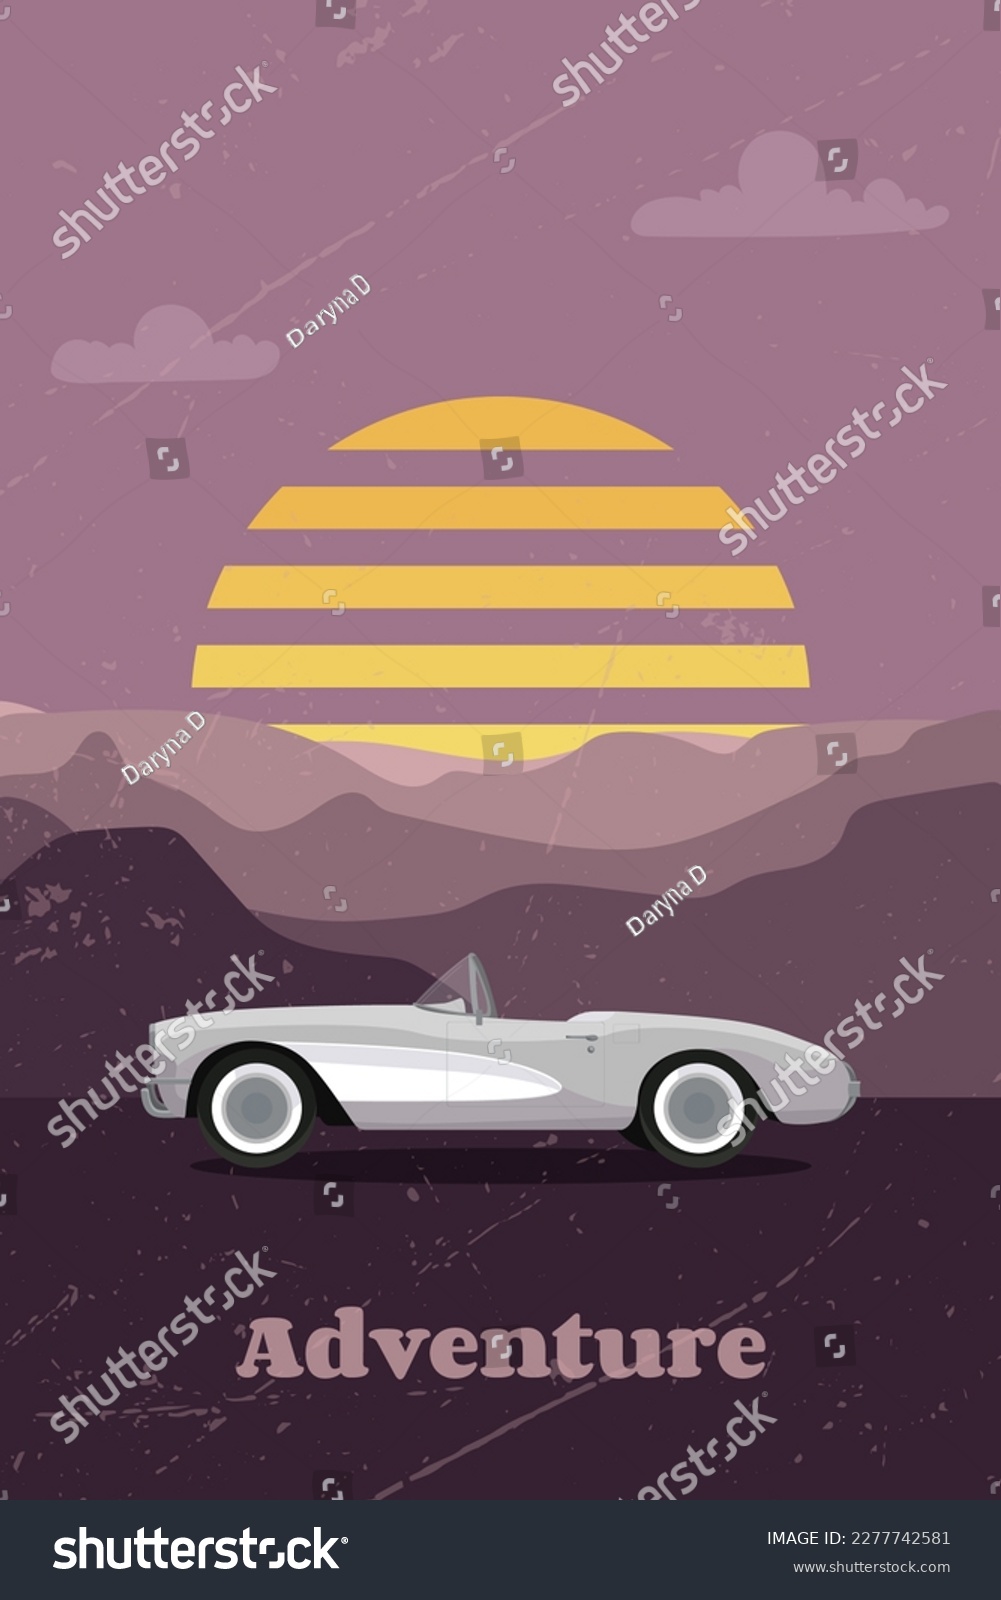 SVG of Classic corvette car around mountains, sunset. Adventure poster in retro style. Vector illustration svg